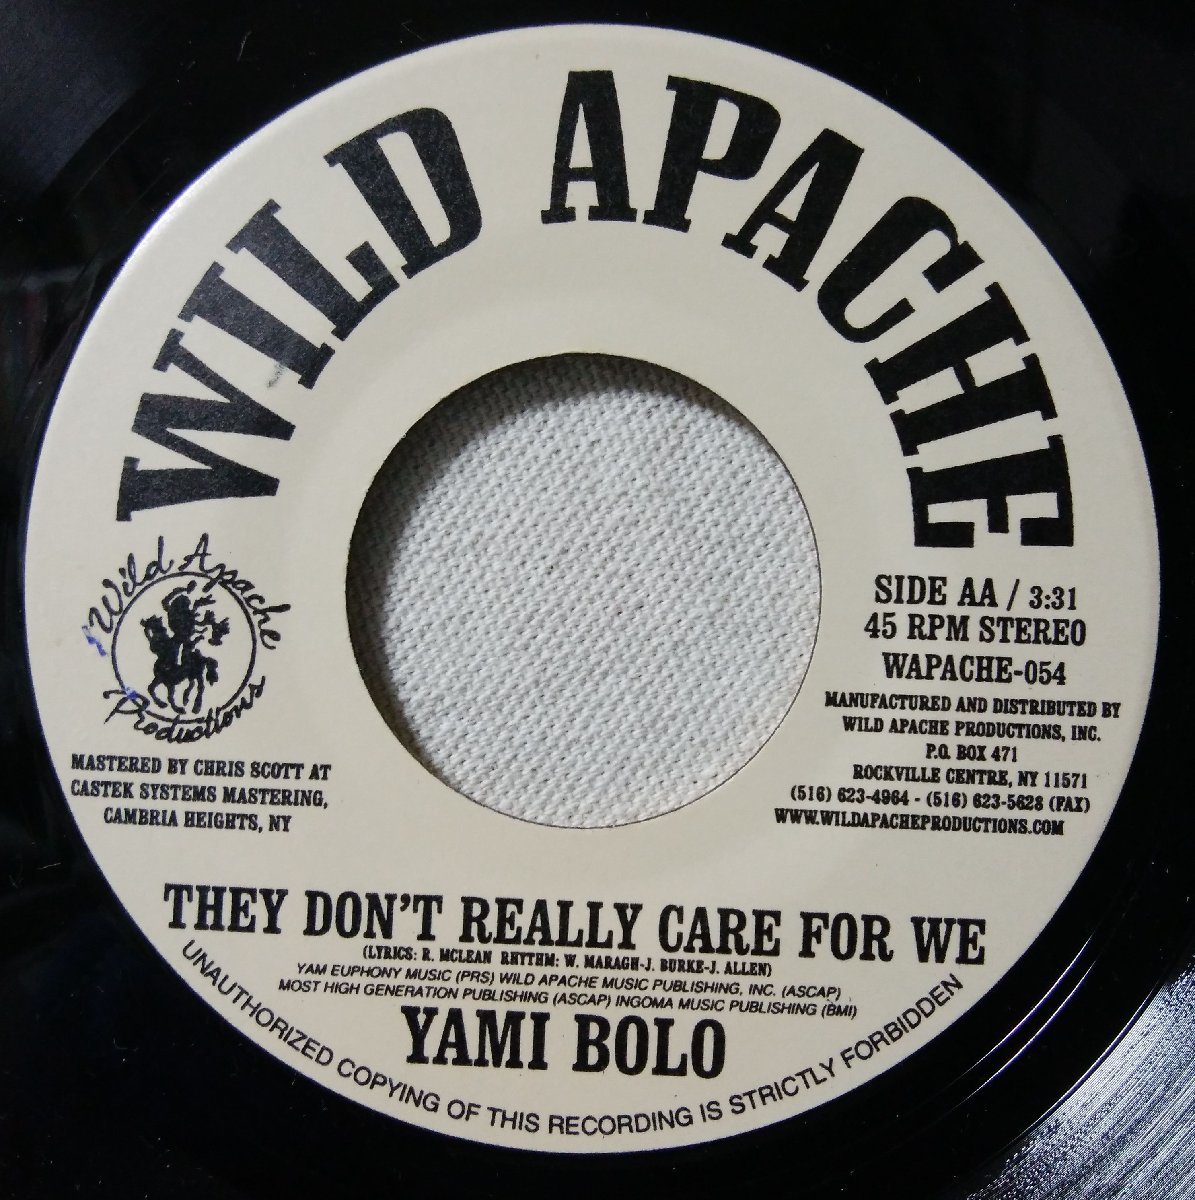 ★★YAMI BORO A DI MUSIC / THEY DON'T REALLY CARE FOR WE★レゲエ★ 7インチレコード[8307EPR_画像2